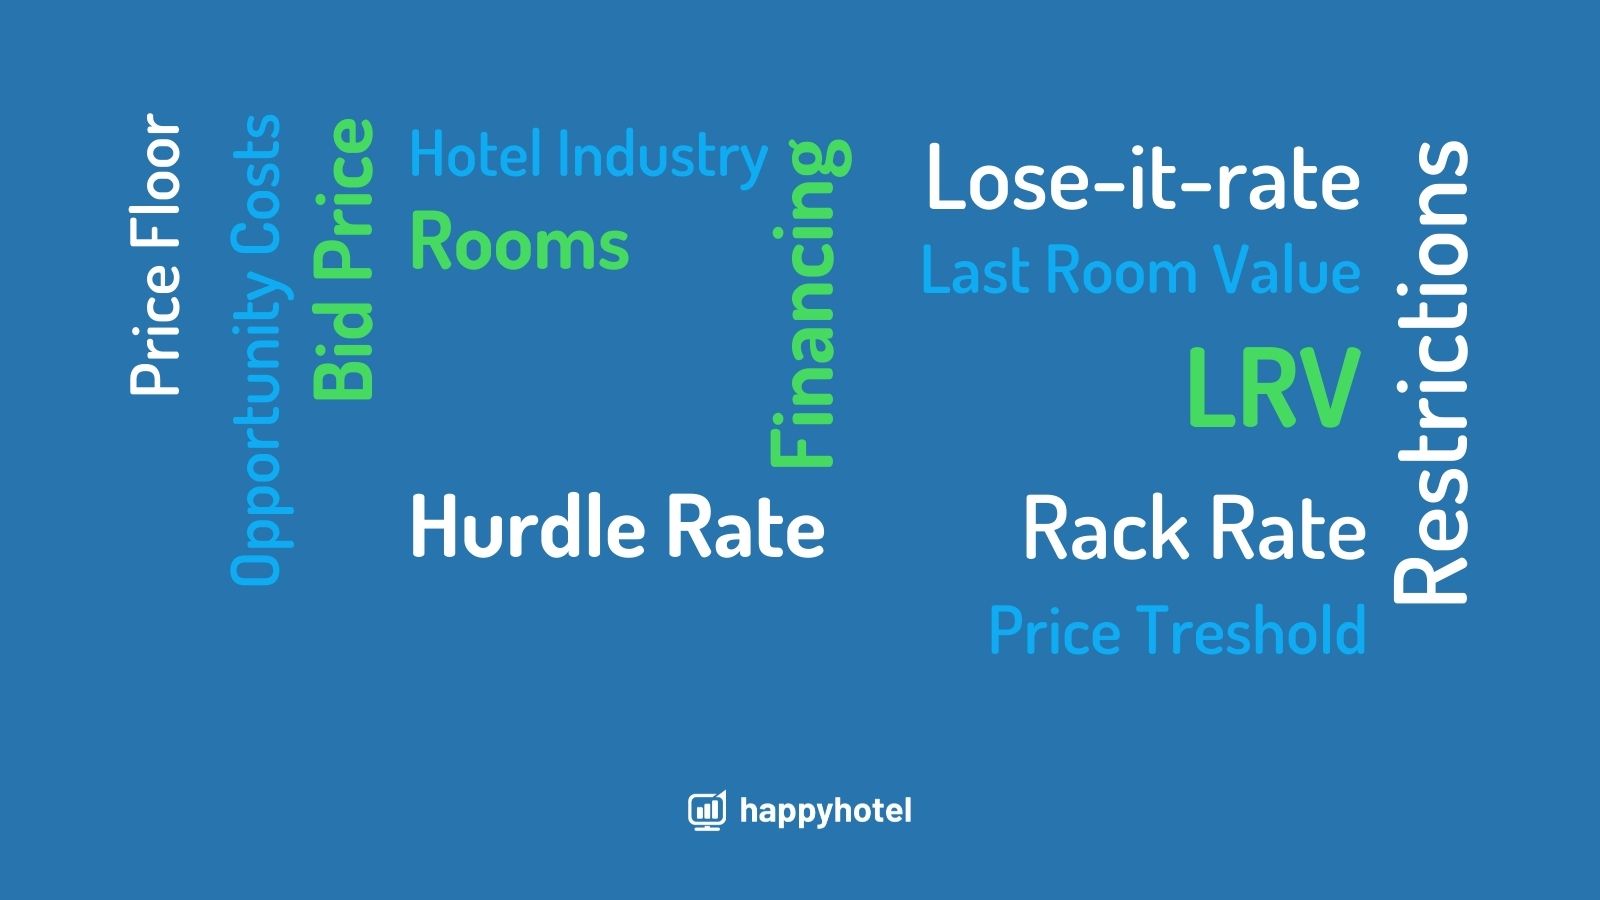 Hurdle Rate - defintion and how it is in the hotel industry